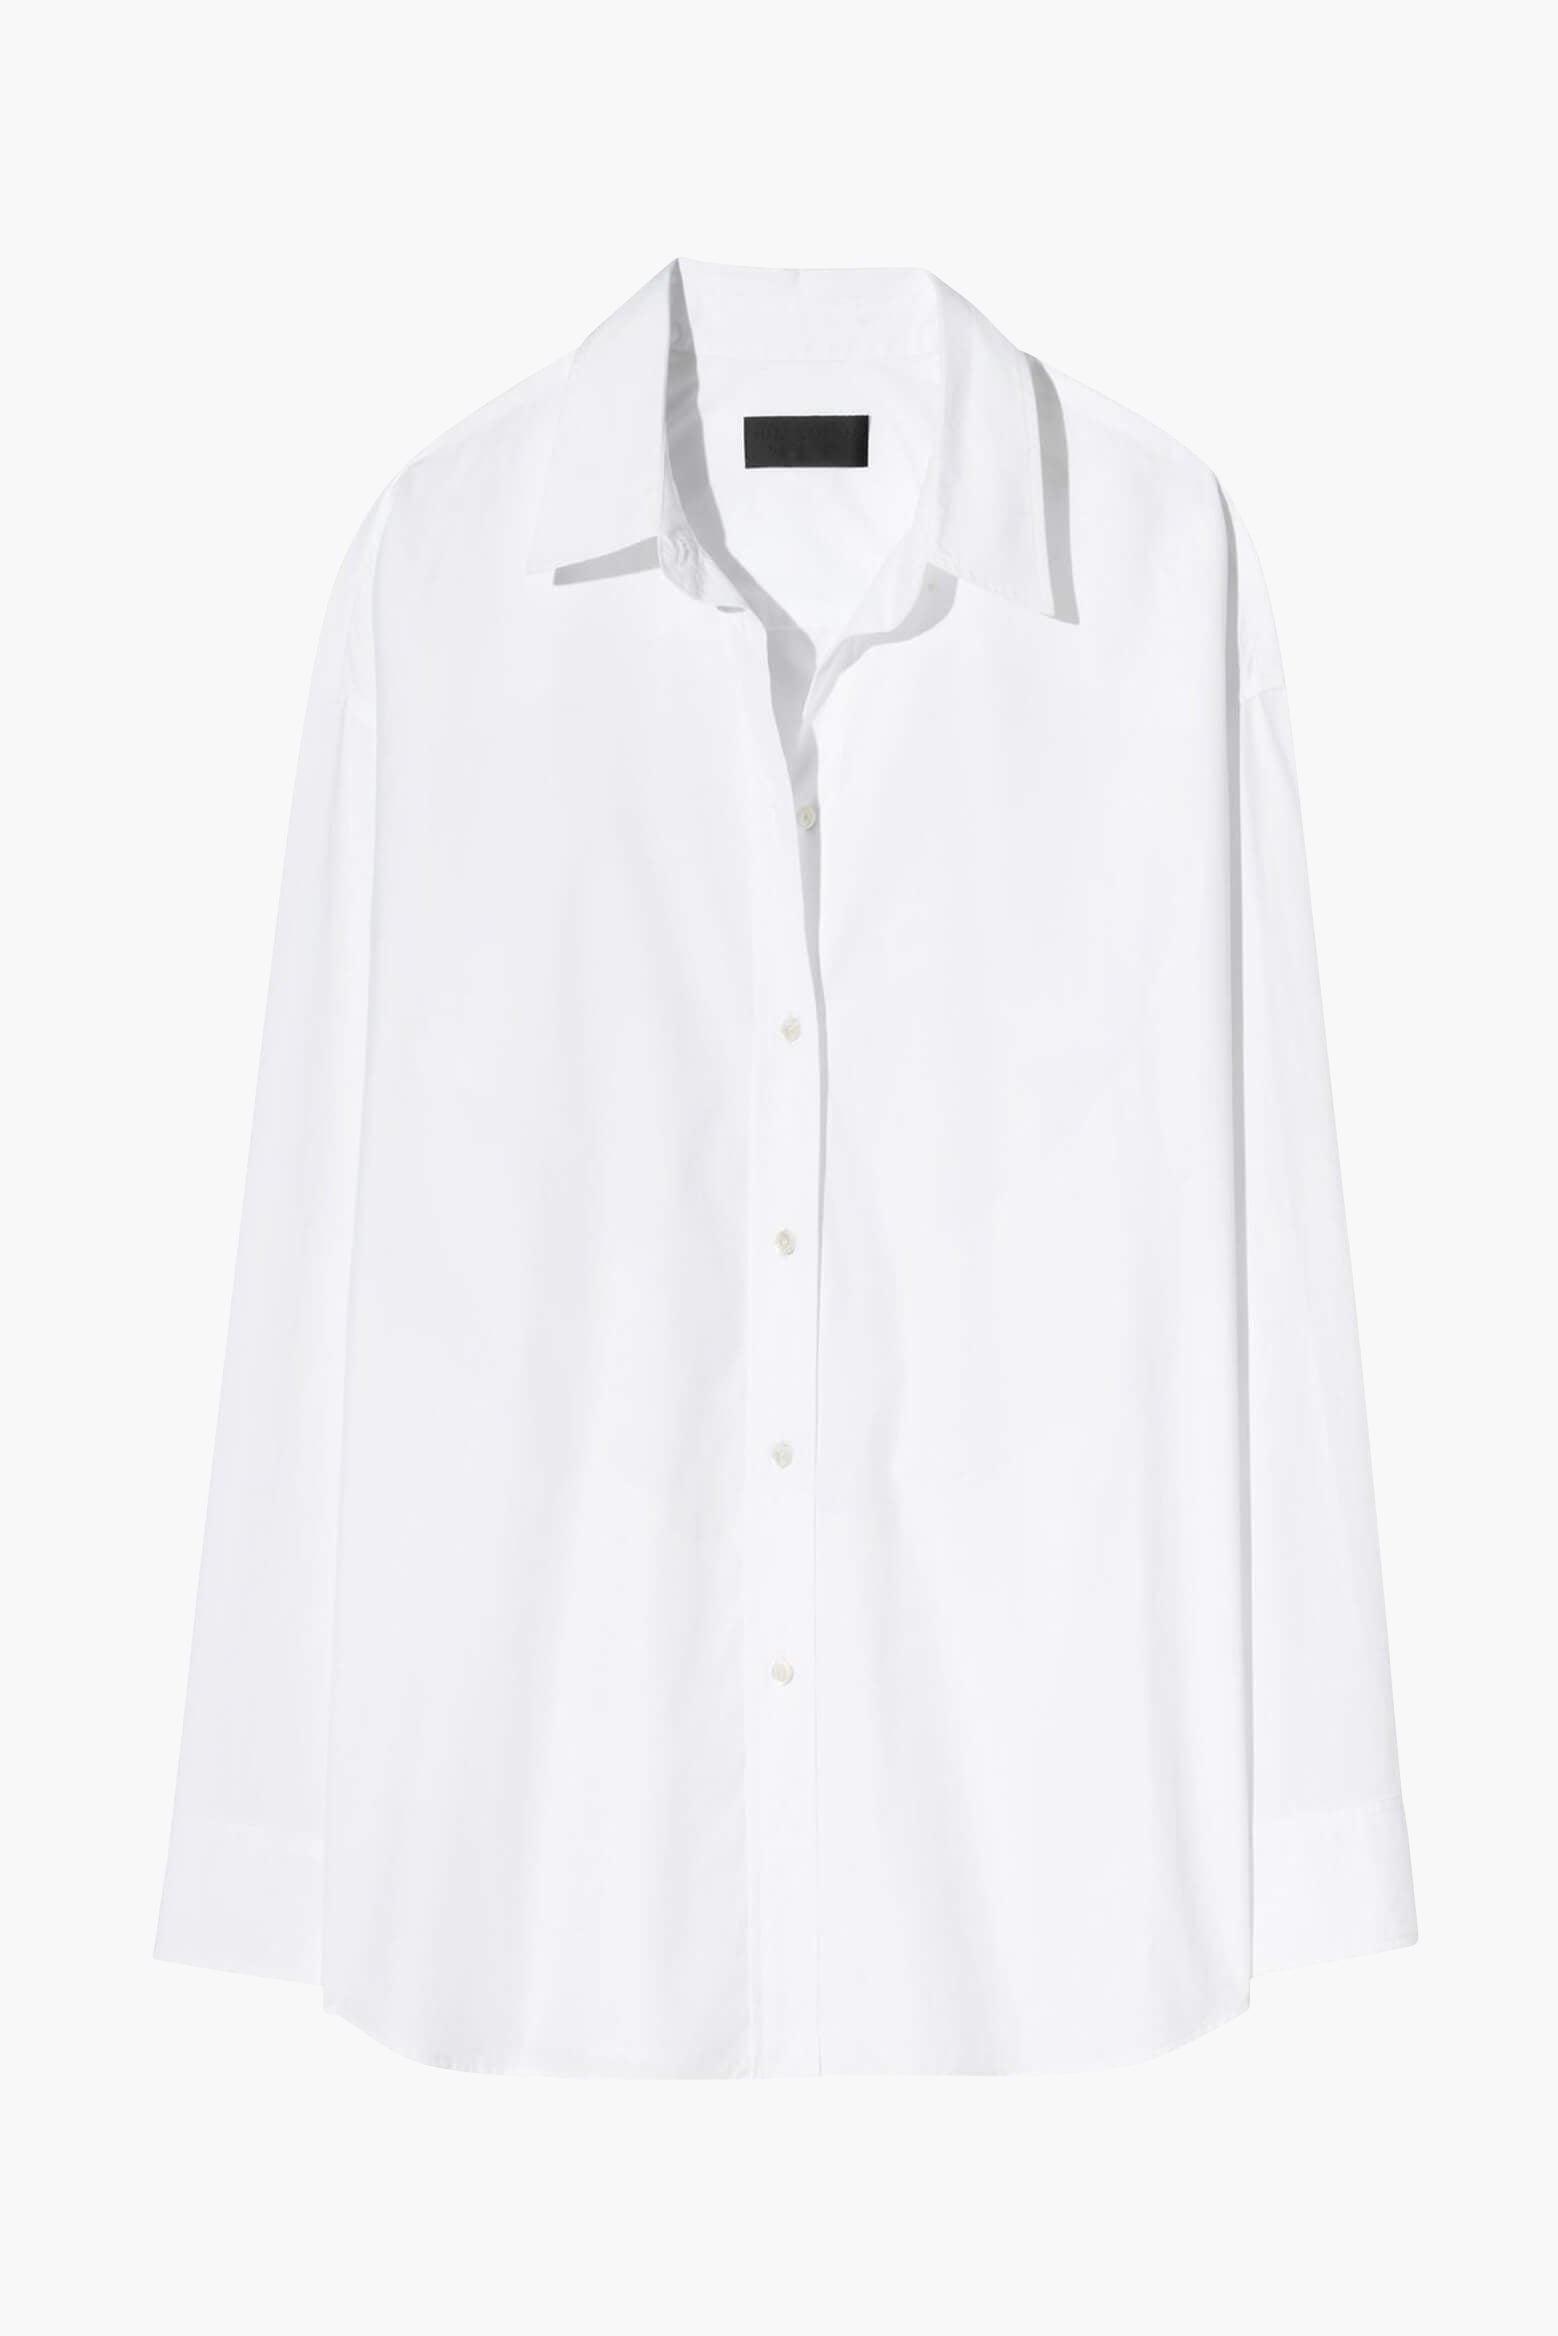 Nili Lotan Mael Oversized Shirt in White available at TNT The New Trend Australia. Free shipping for orders over $300 AUD.